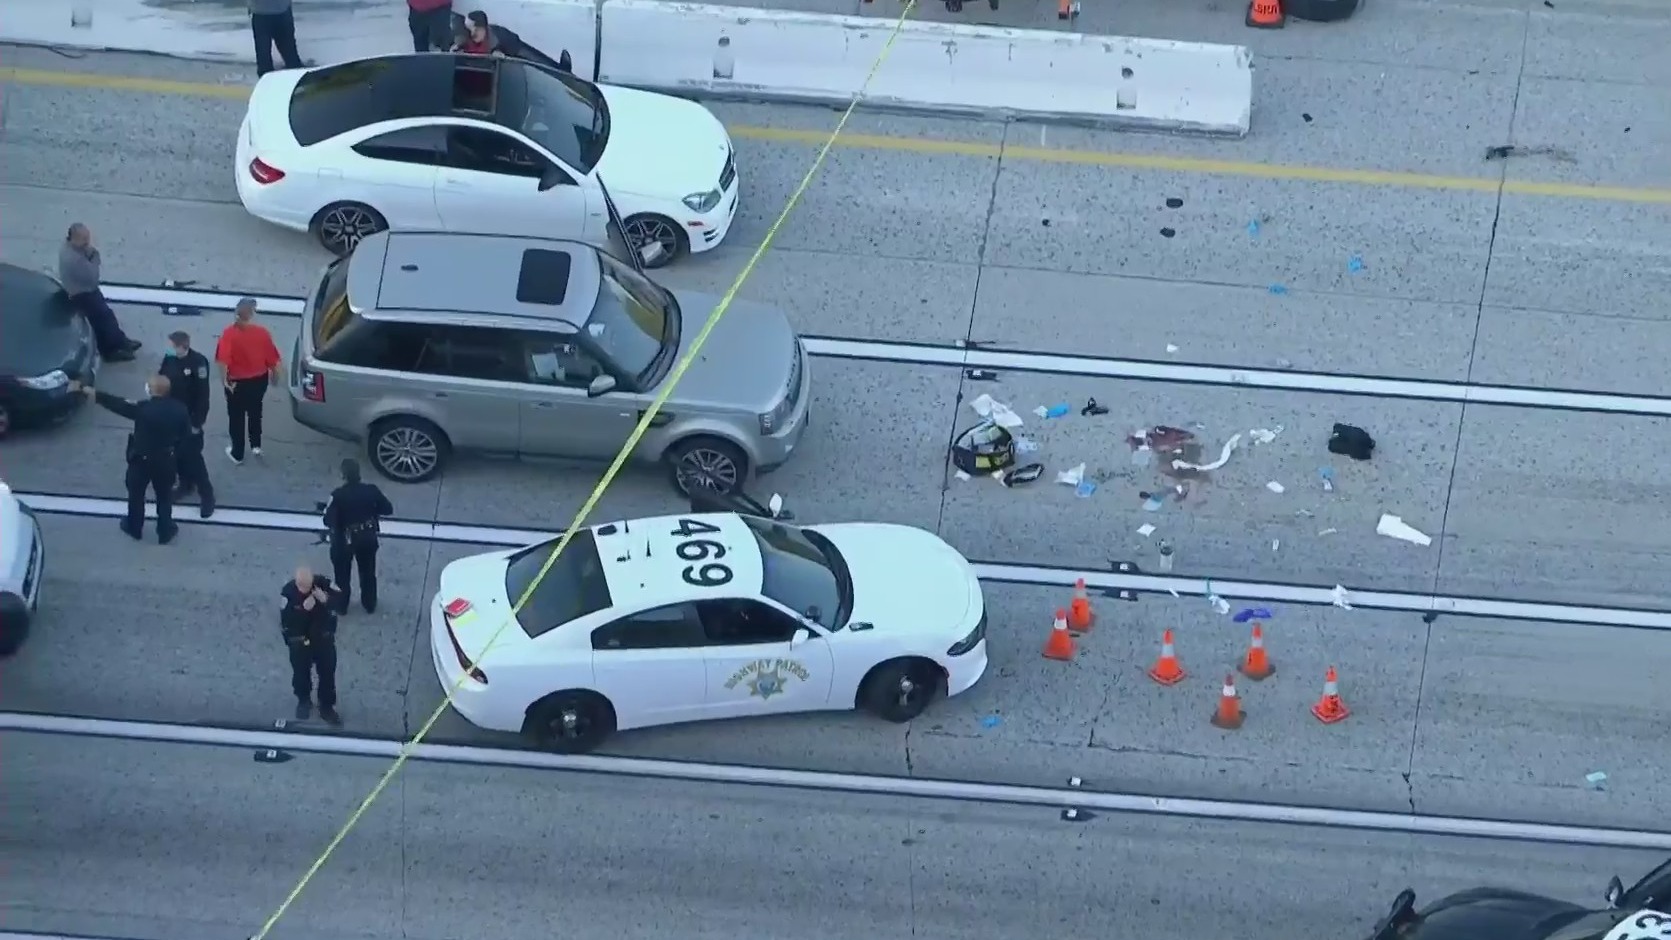 Authorities shut down the 10 Freeway in Upland to investigate a shooting on Feb. 5, 2021. (KTLA)